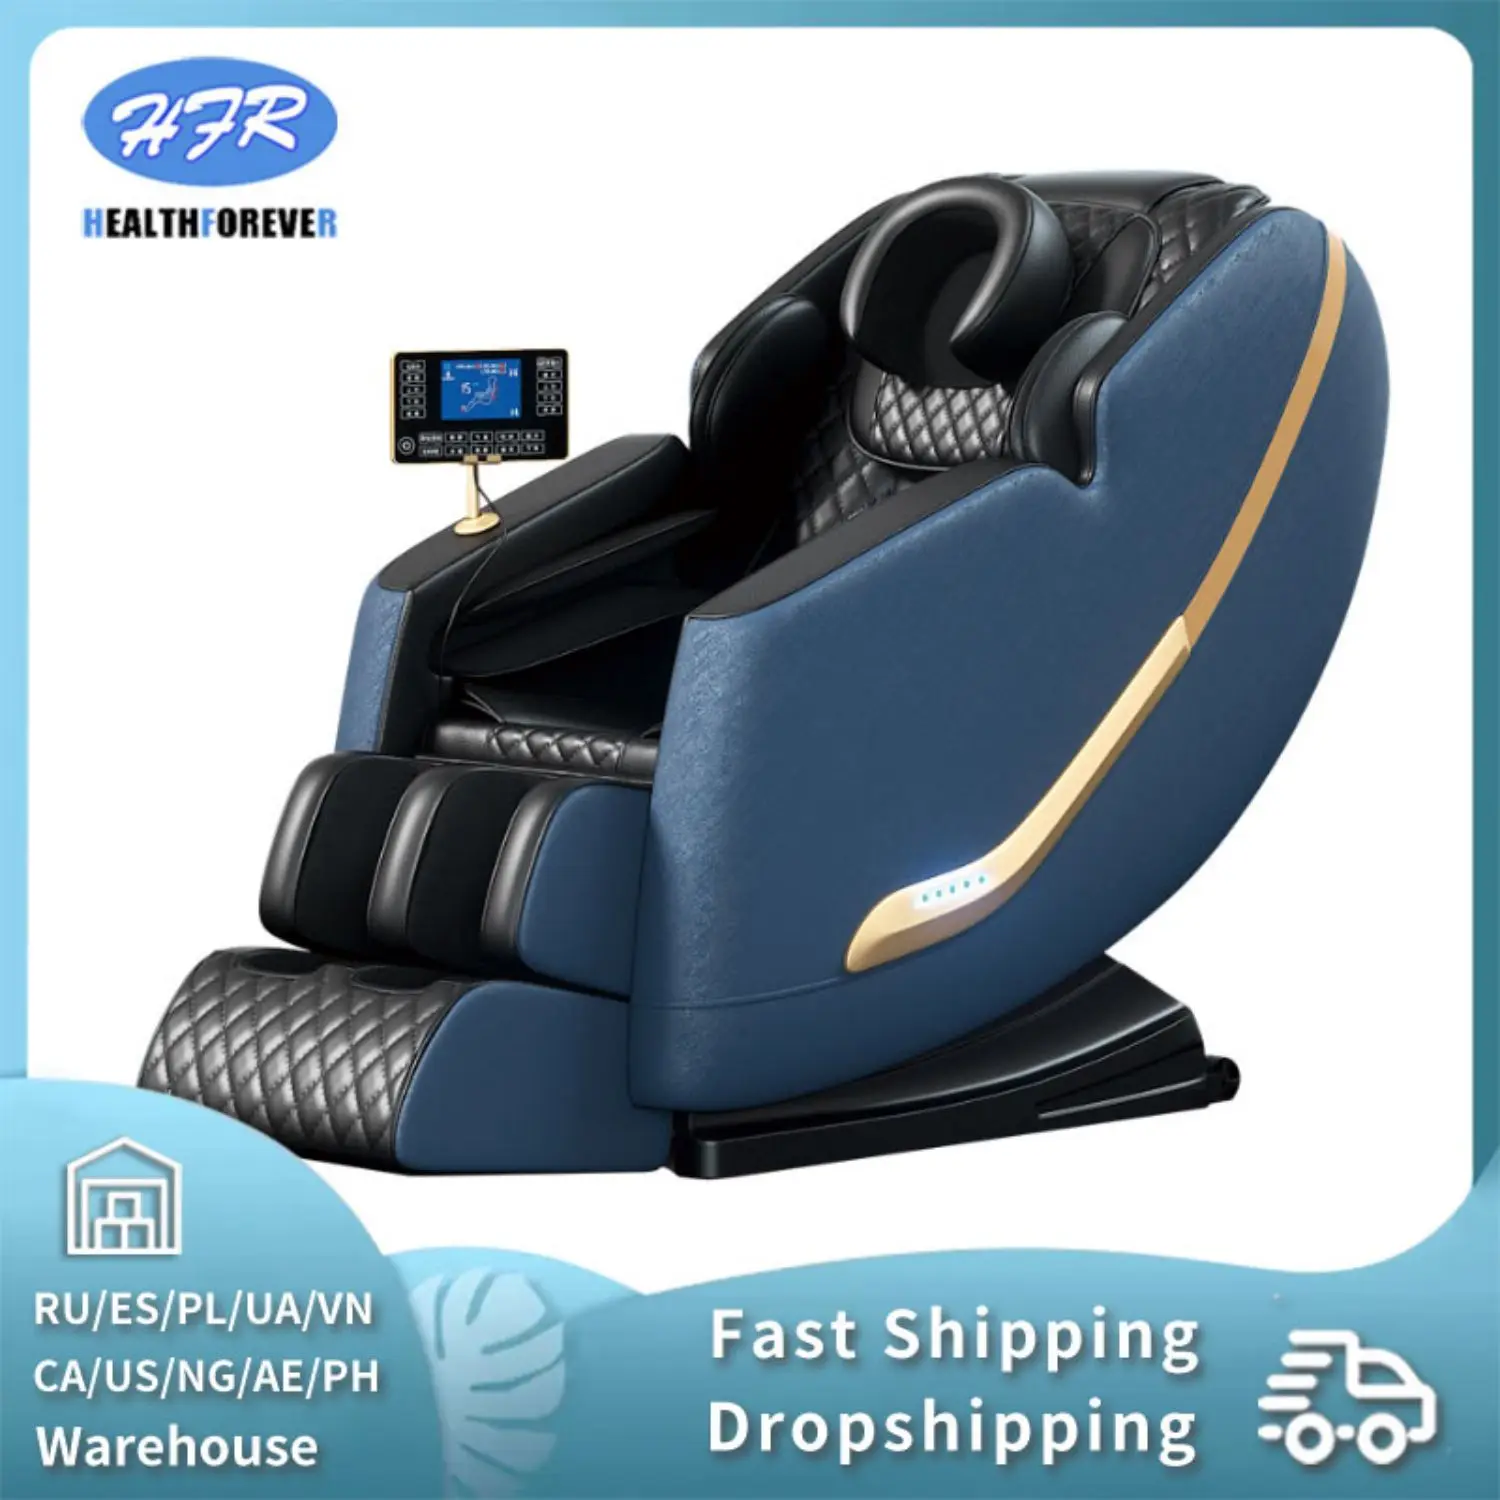 

HFR-S600-1 New model Luxury Zero Gravity Electric 4D Full Body Office Massage Chair Luxury Smart Space Capsule Relaxing massage